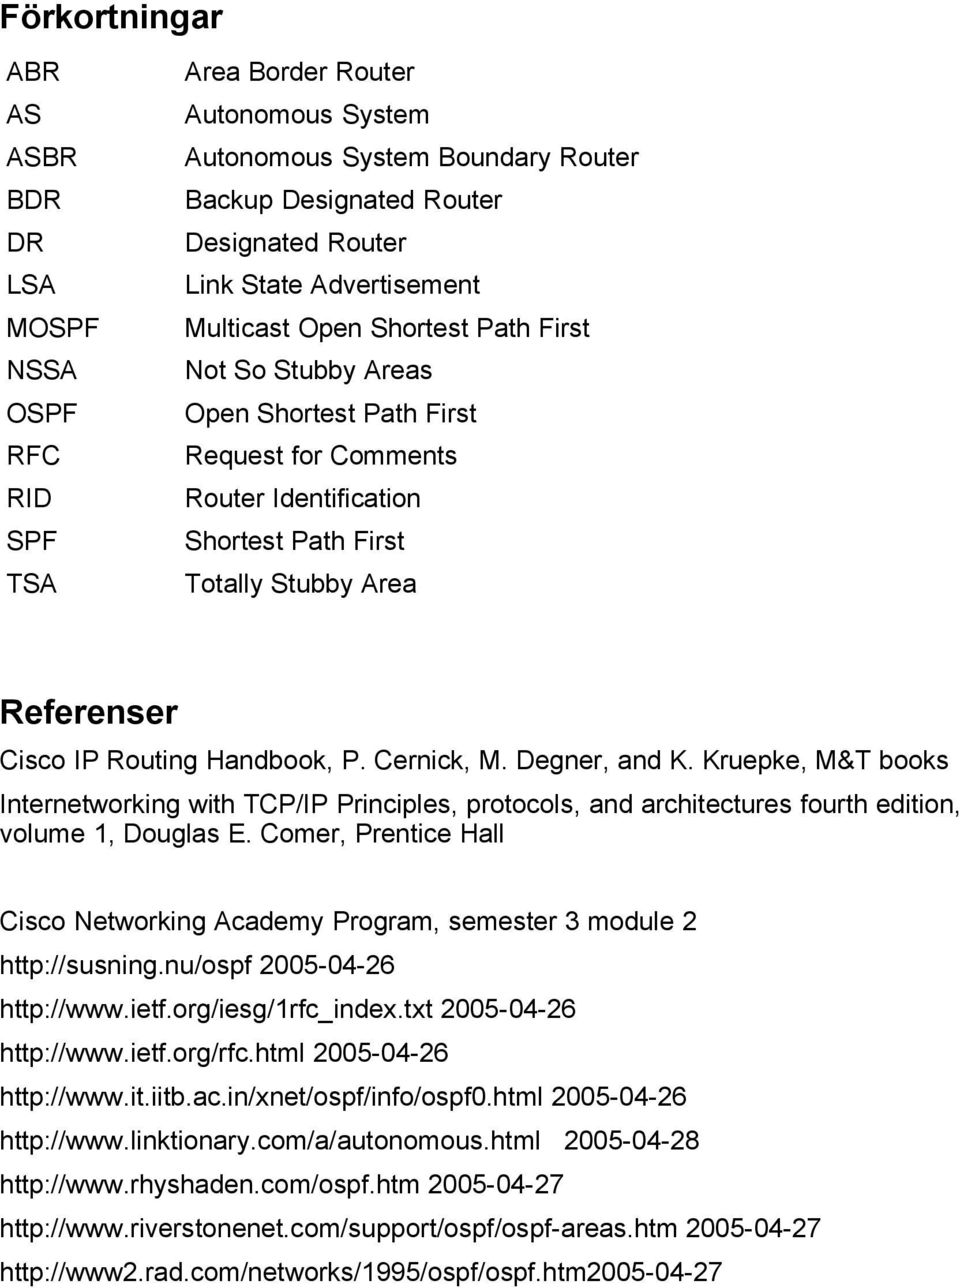 Routing Handbook, P. Cernick, M. Degner, and K. Kruepke, M&T books Internetworking with TCP/IP Principles, protocols, and architectures fourth edition, volume 1, Douglas E.